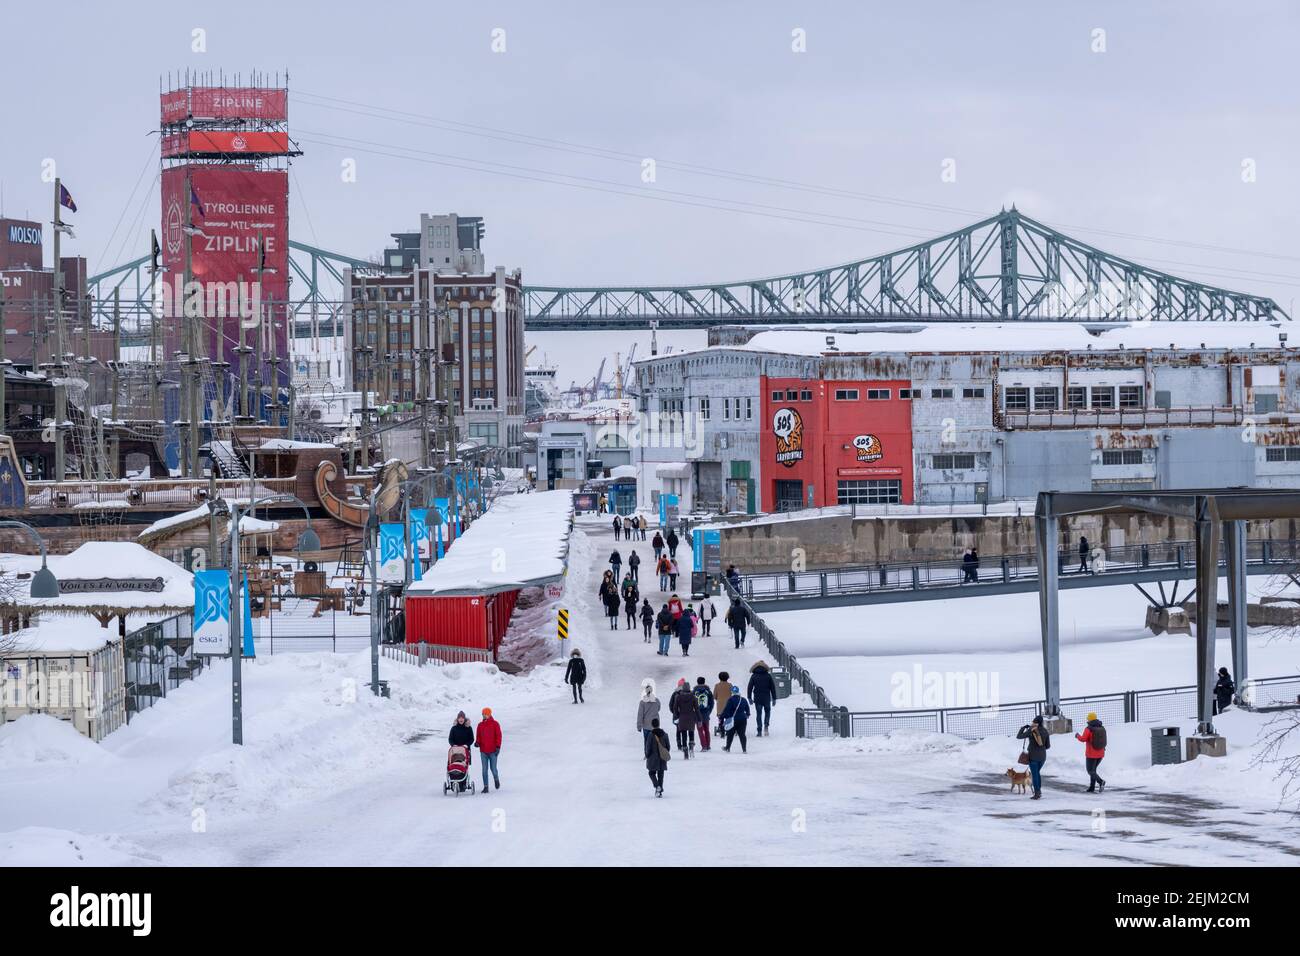 montreal, CA - 22 February 2021: Old Port of Montreal, with Jacques Cartier Bridge in background Stock Photo